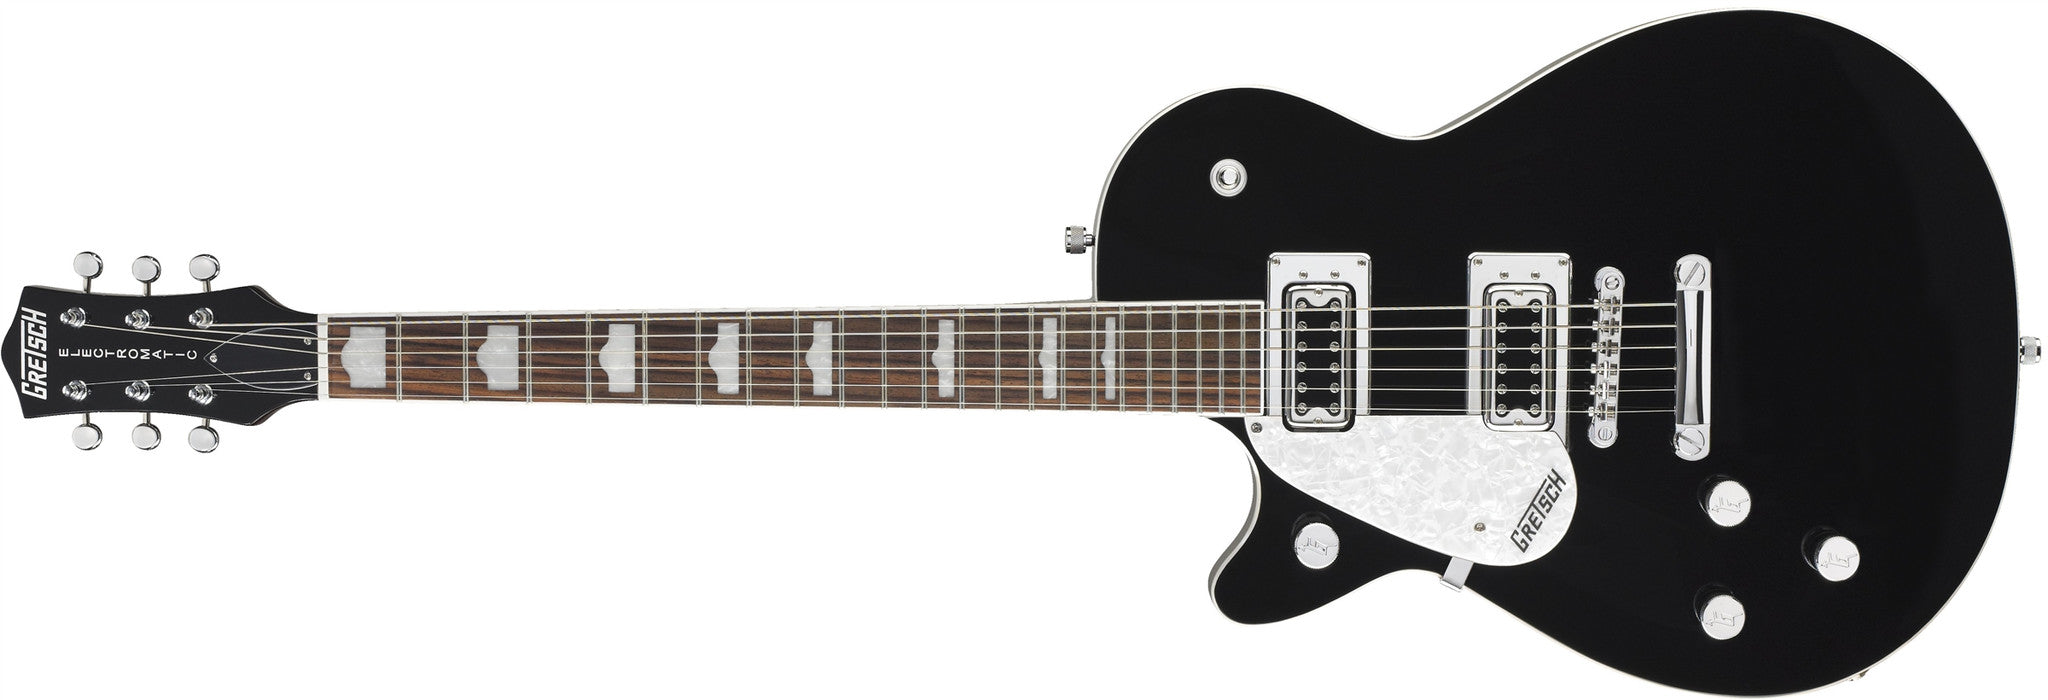 Gretsch G5435LH Electromatic Pro Jet, Left-Handed, Rosewood Fingerboard, Black 2517210506 - L.A. Music - Canada's Favourite Music Store!